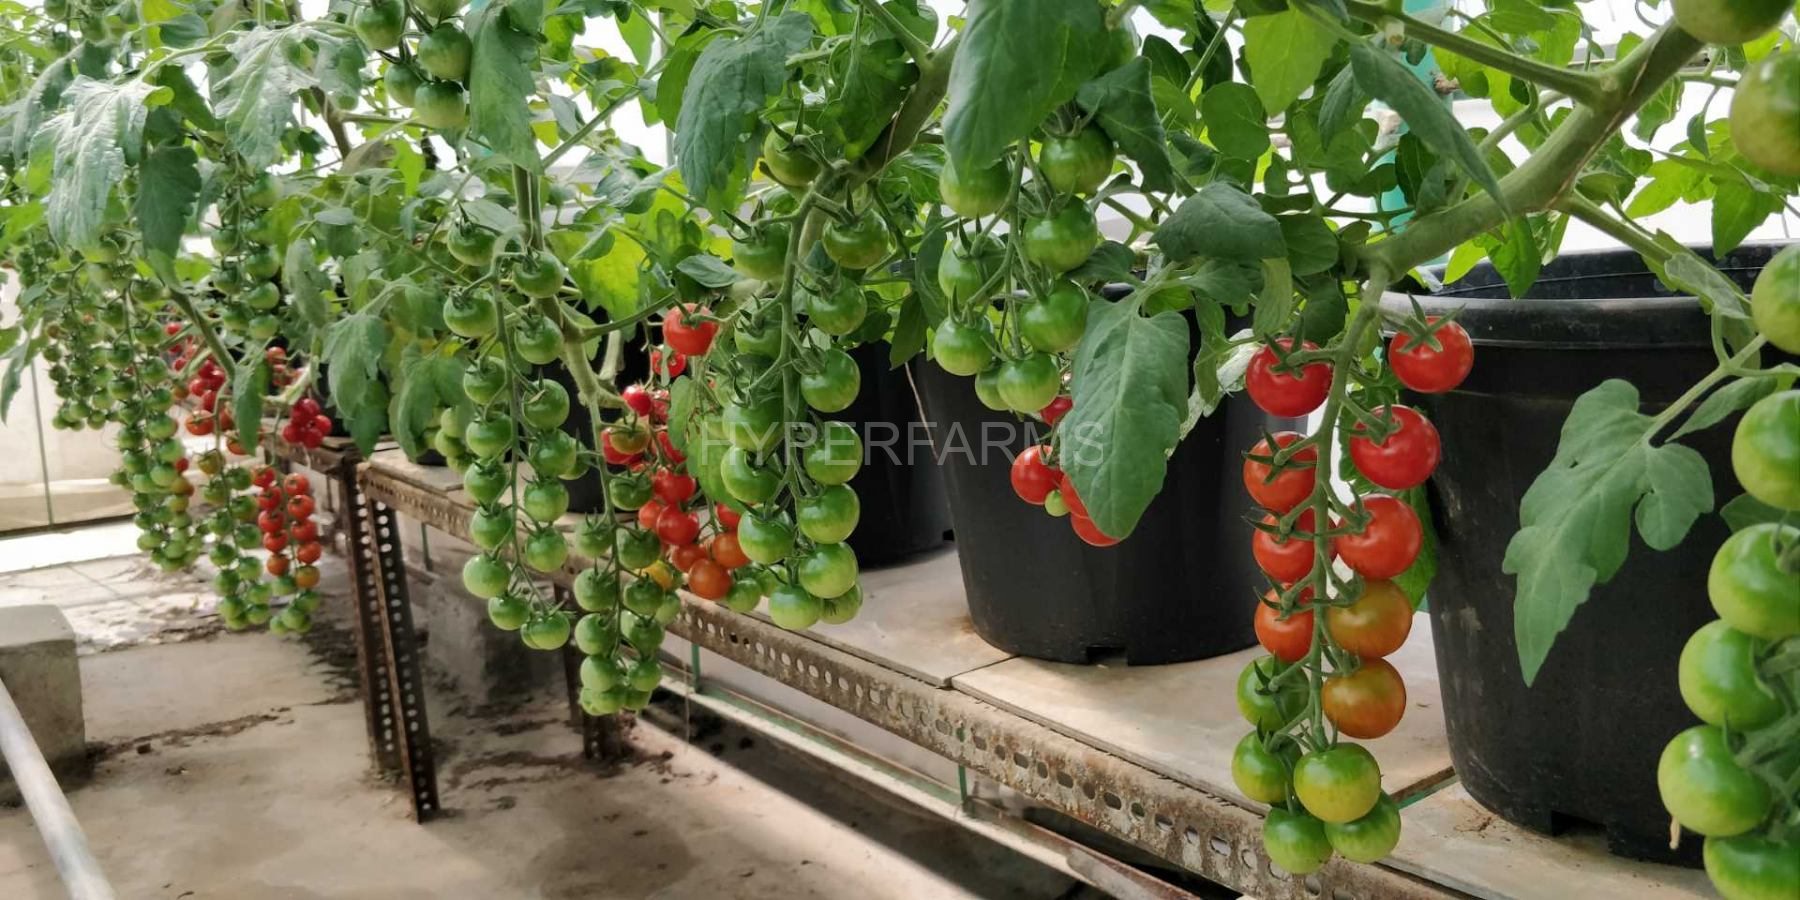 cherry-tomato-hydroponics-hyperfarms-in-india4-Large